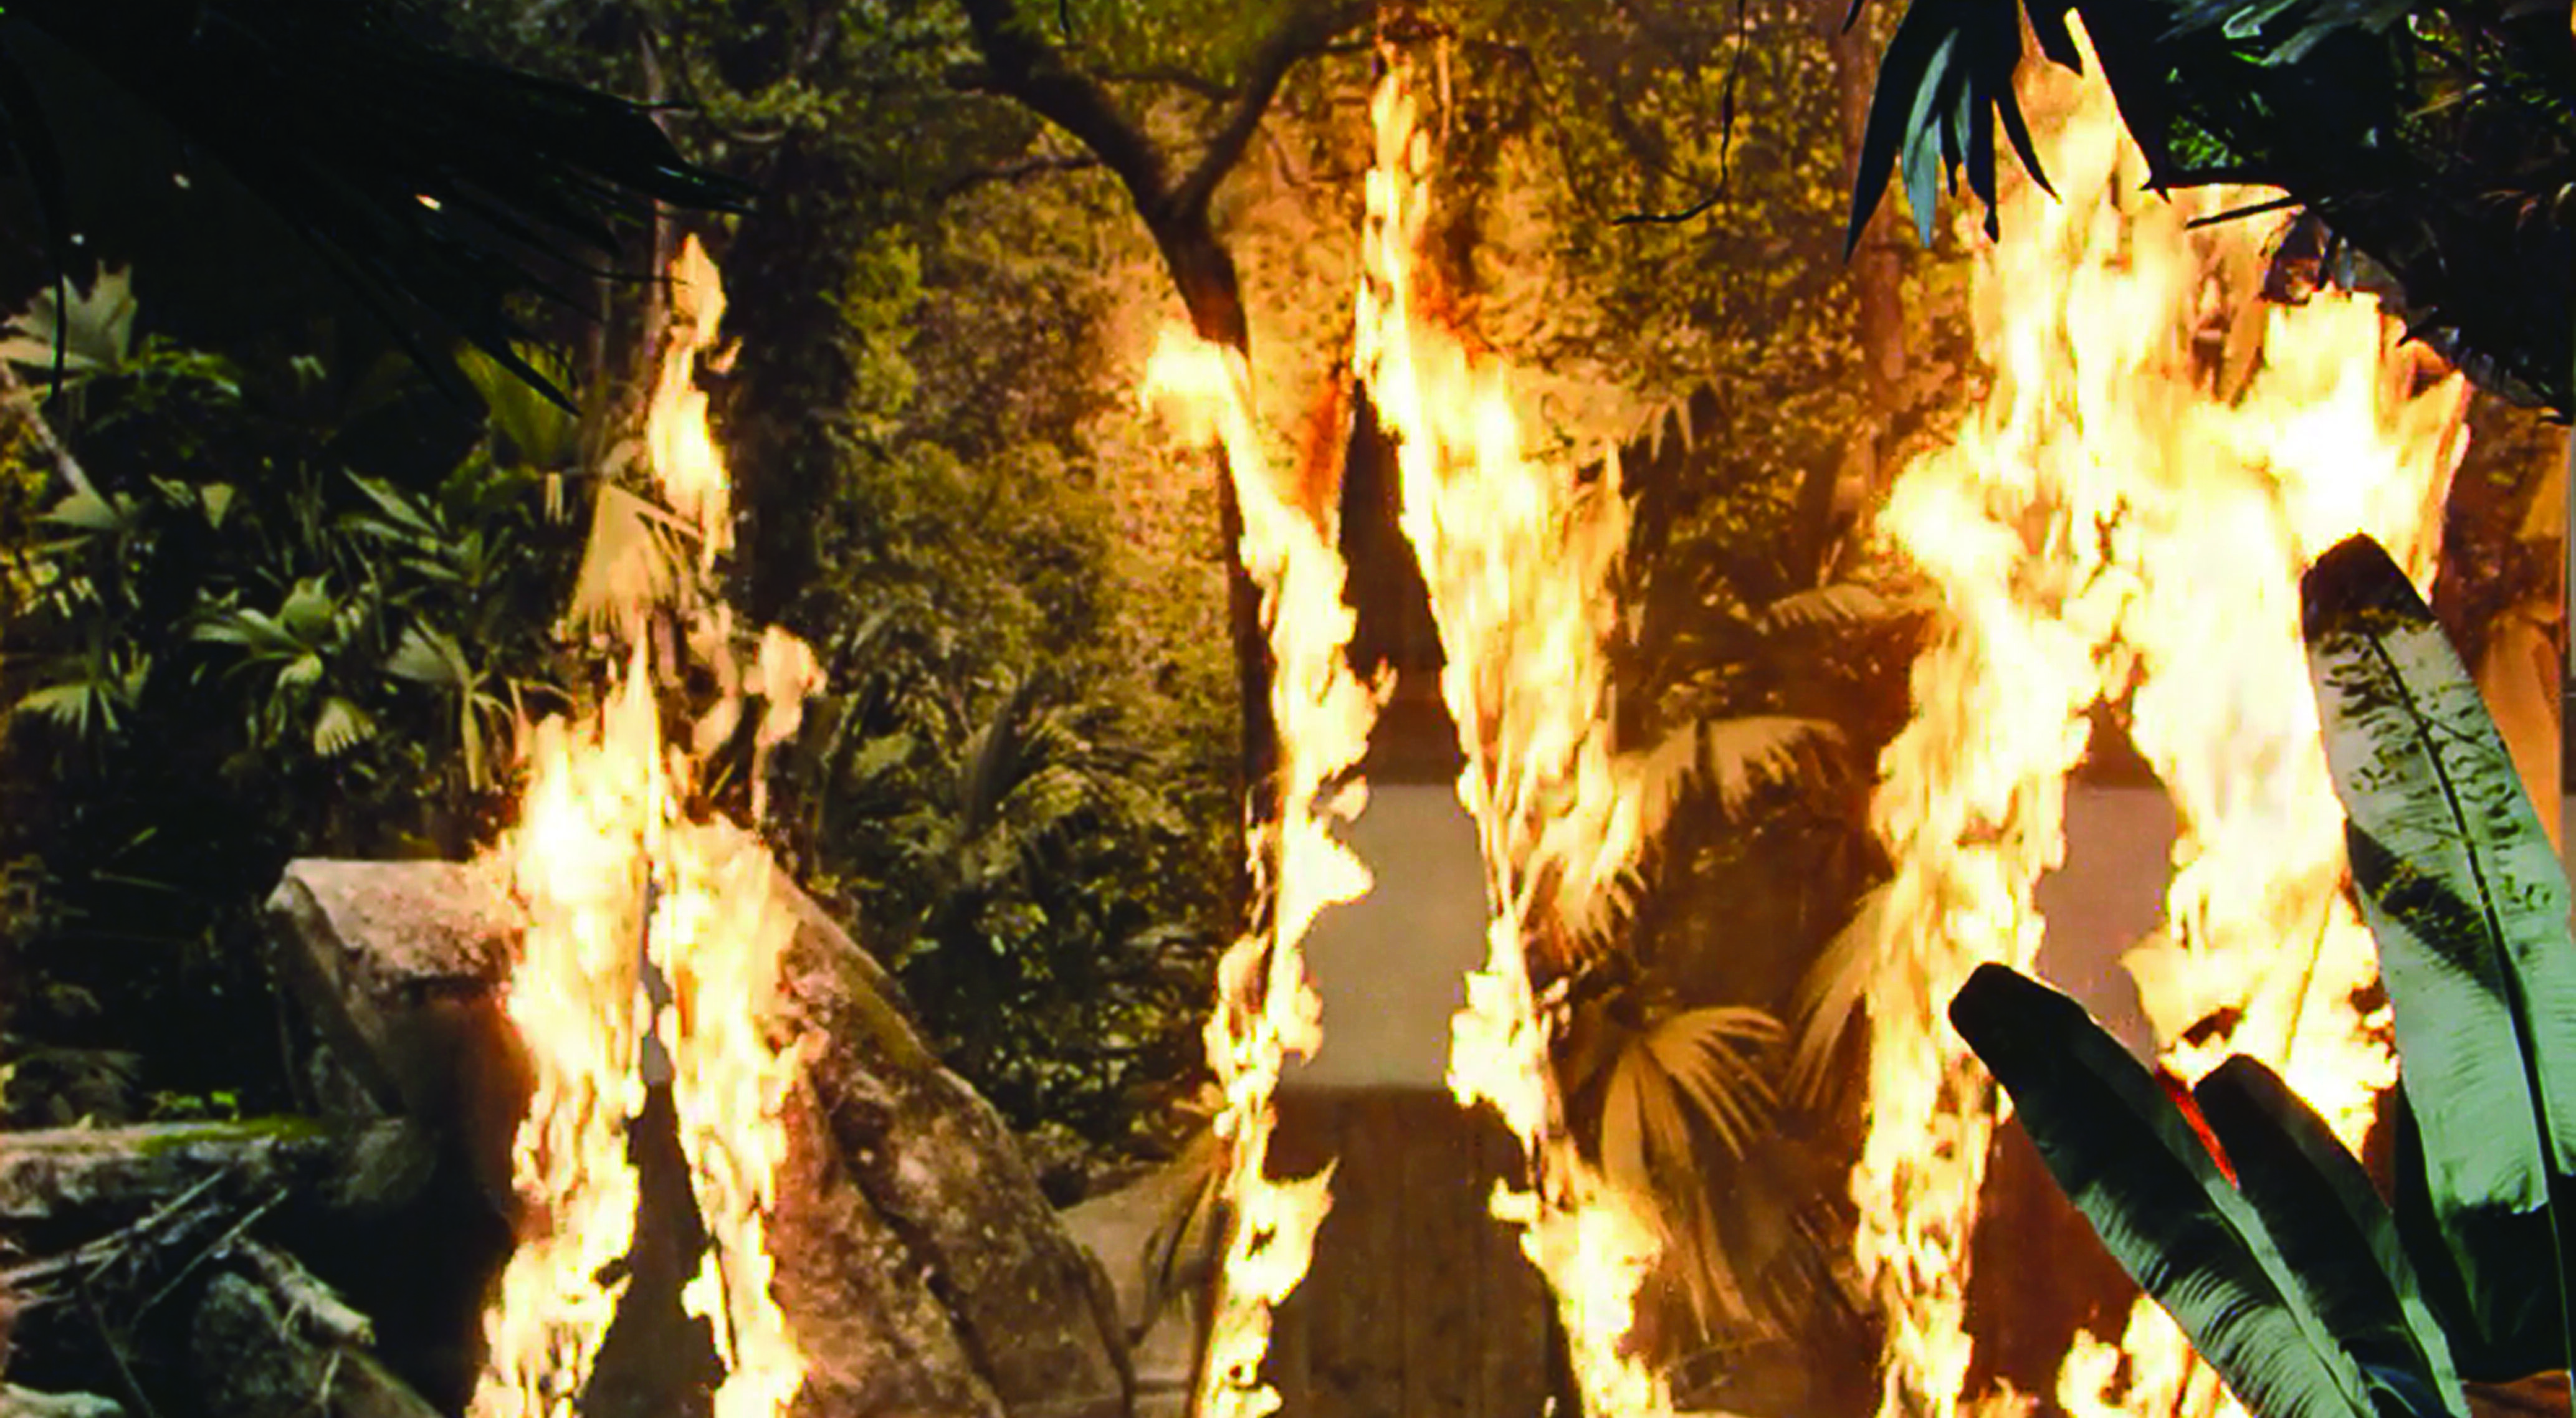 A still image from a short film showing what looks like a beach jungle on fire in three places. In reality, the image is a hanging, large-scale photograph of a beach jungle engulfed with flames. Sand and plants can be seen in front of the photograph, further adding to the illusion.